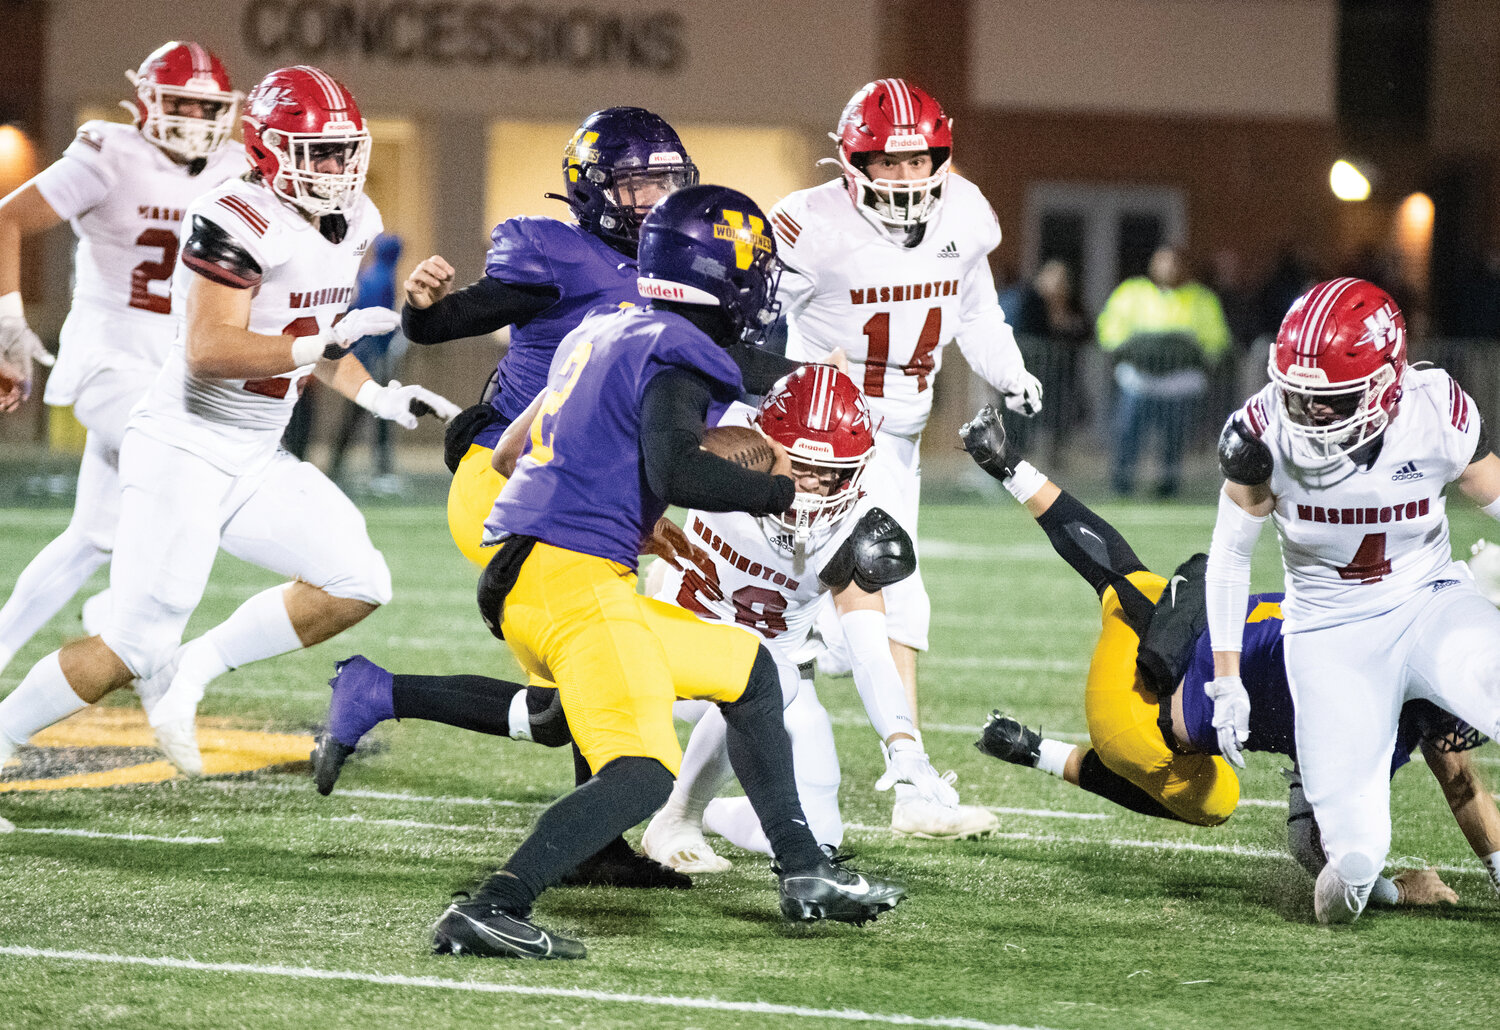 Warrior defenders Naithen Spaulding (23), Jake Coles (28), Keller Howard (14) and Cole Beller (4) bottle up a Vian ball carrier Friday night during Washington’s 47-14 playoff win. The Washington defense held Vian to 2.5 yards per rushing attempt in the game.